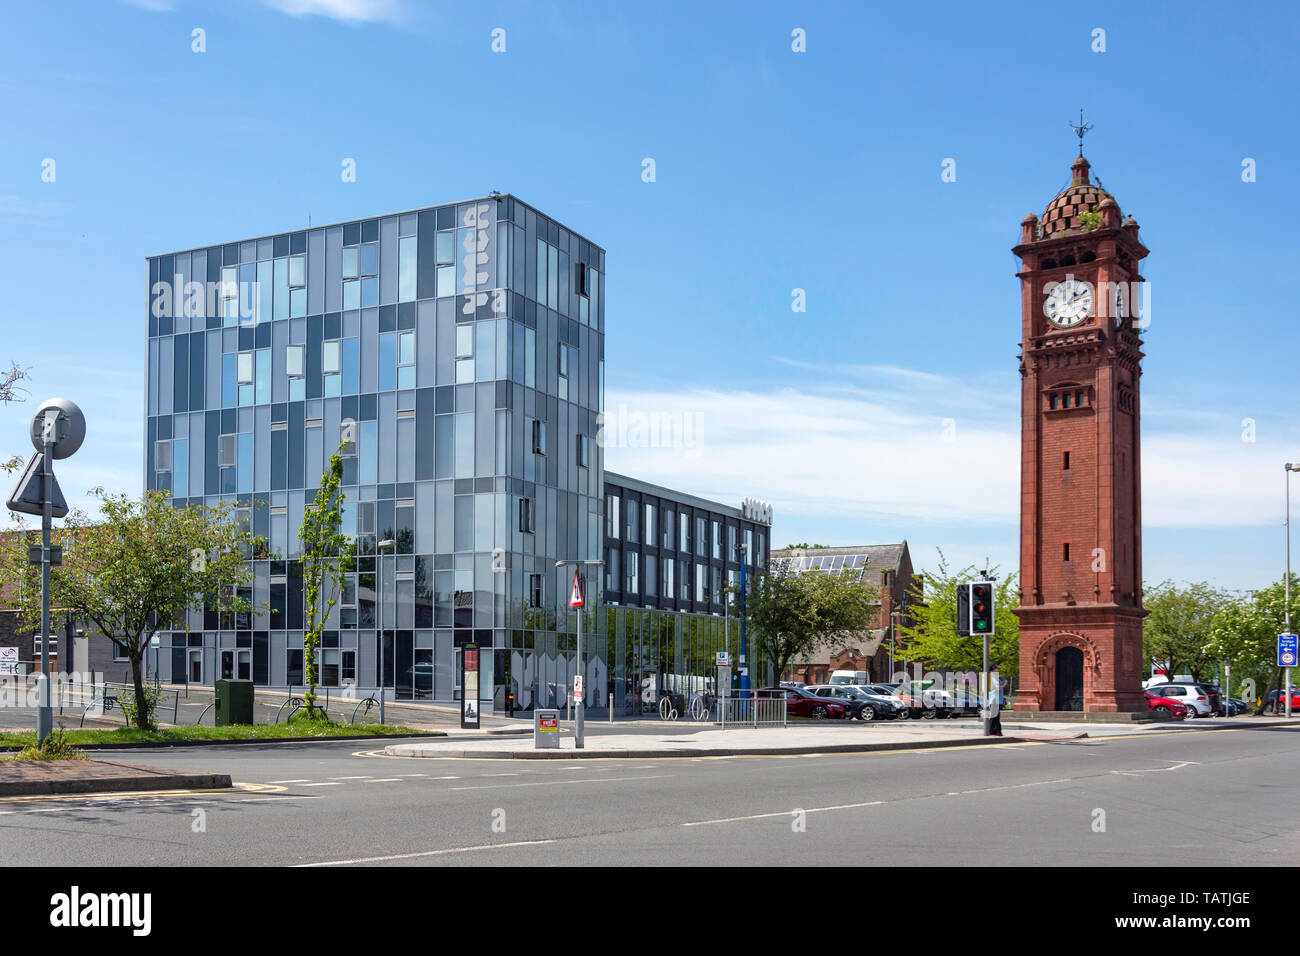 YMCA West Bromwich e Farley Clock Tower, Carter verde, West Bromwich, West Midlands, England, Regno Unito Foto Stock